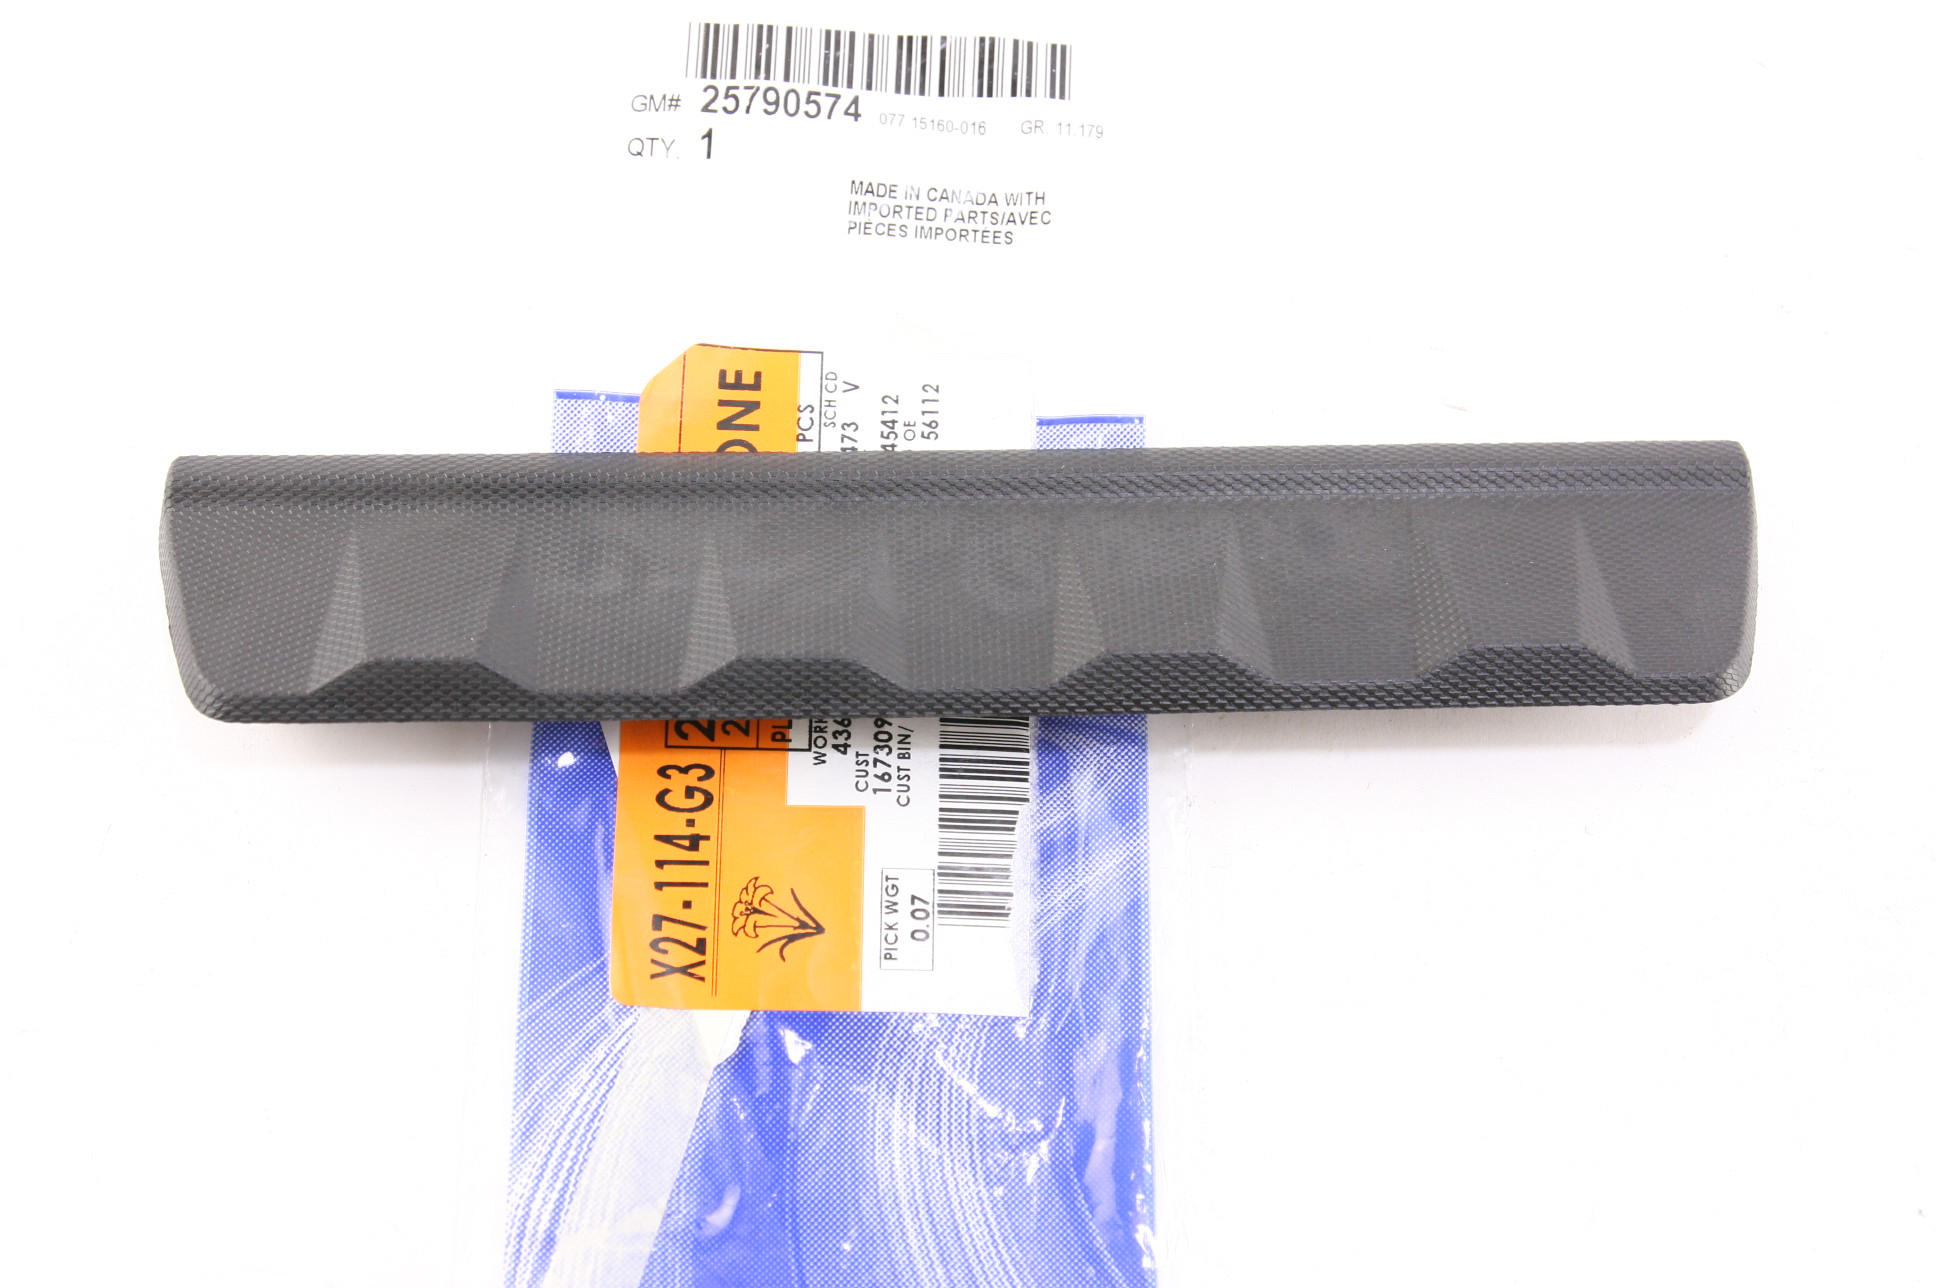 ***~ New OEM 25790574 Genuine GM Door Sill Plate Fast Free Shipping - image 4